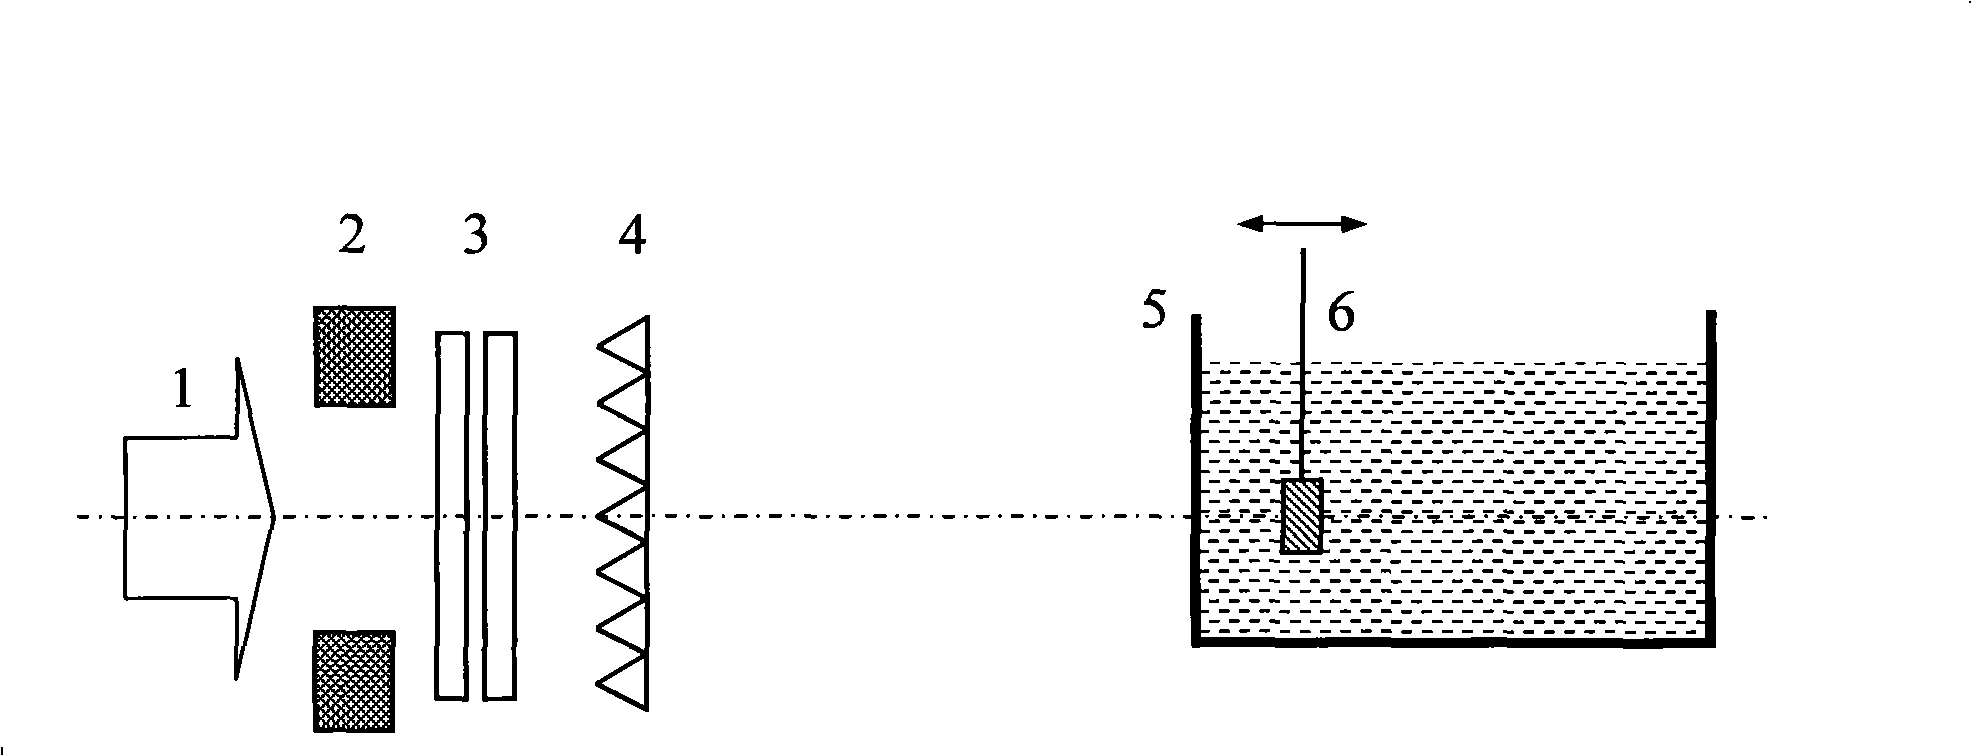 Dose monitoring detector calibration device and method in heavy ion beam treating carcinoma